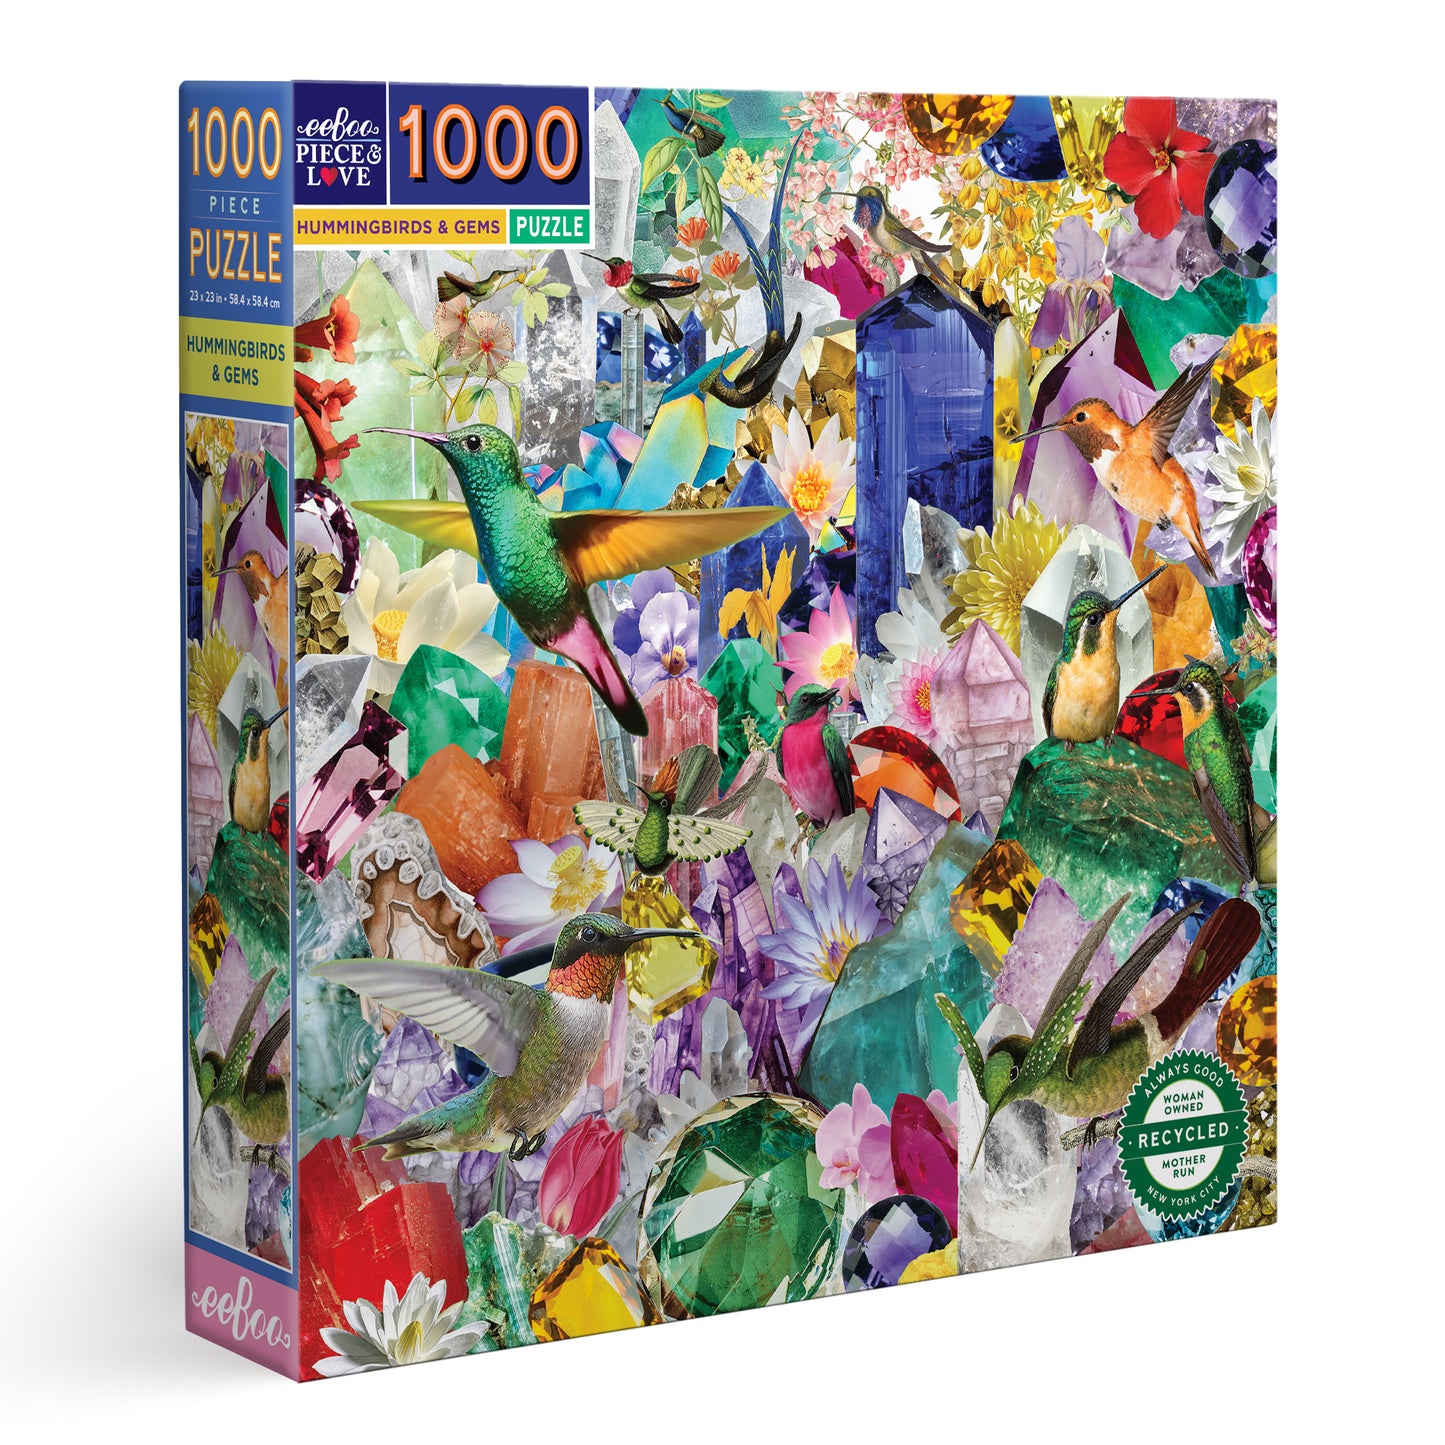 Hummingbirds and Gems 1000 Piece Jigsaw Puzzle by eeBoo | Beautiful Unique Gifts for Women